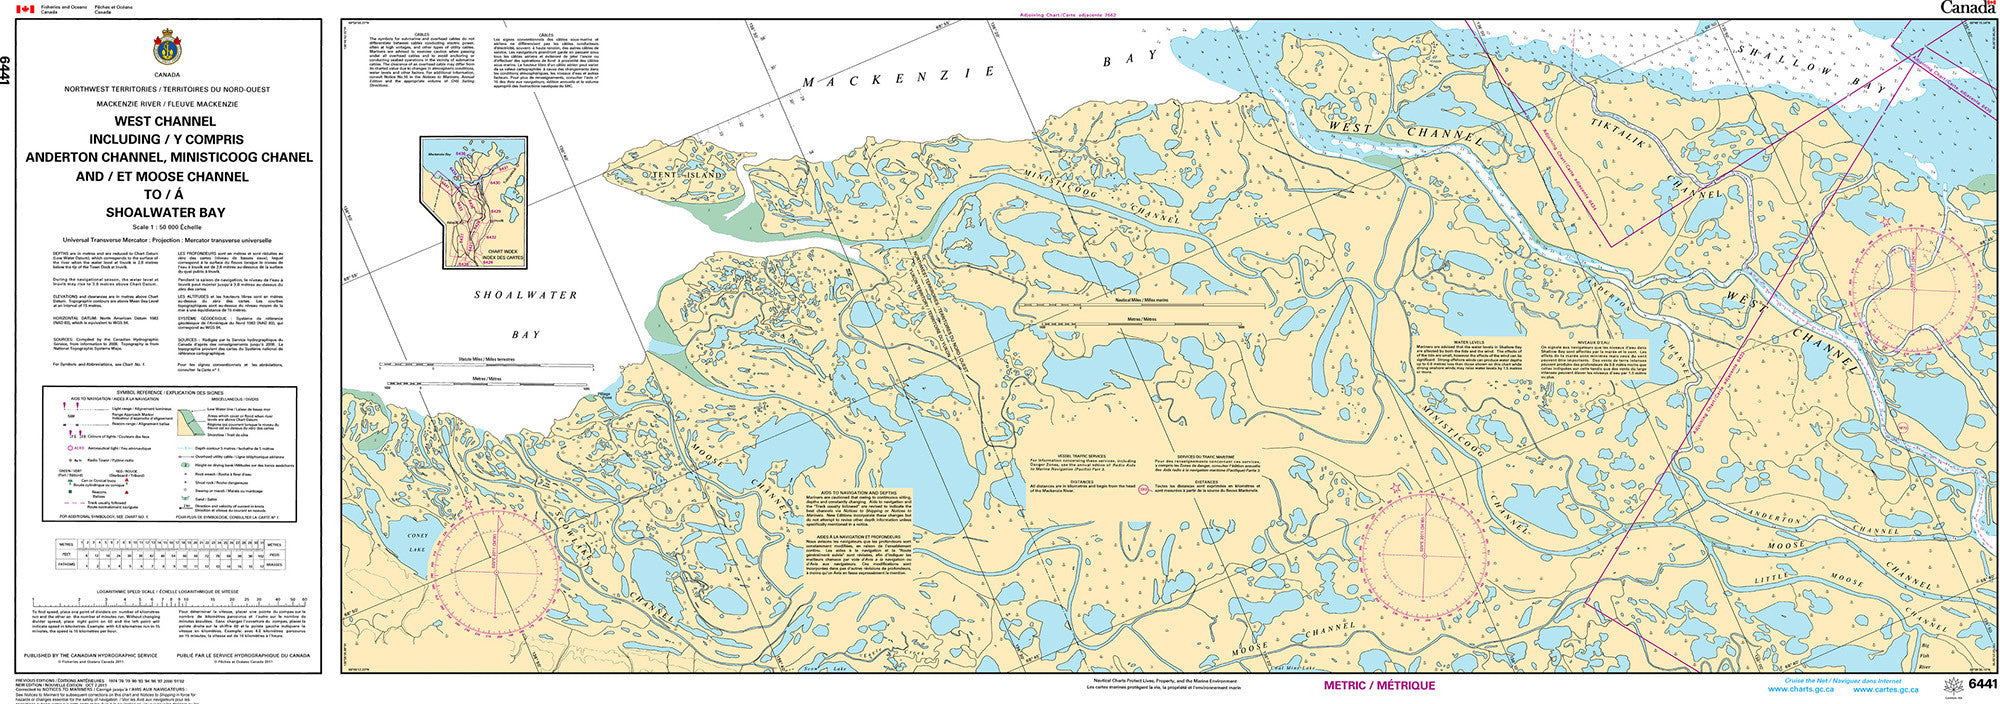 Canadian Hydrographic Service Nautical Chart CHS6441: West Channel including/y compris Anderton Channel, Ministicoog Channel and/et Moose Channel to/à...